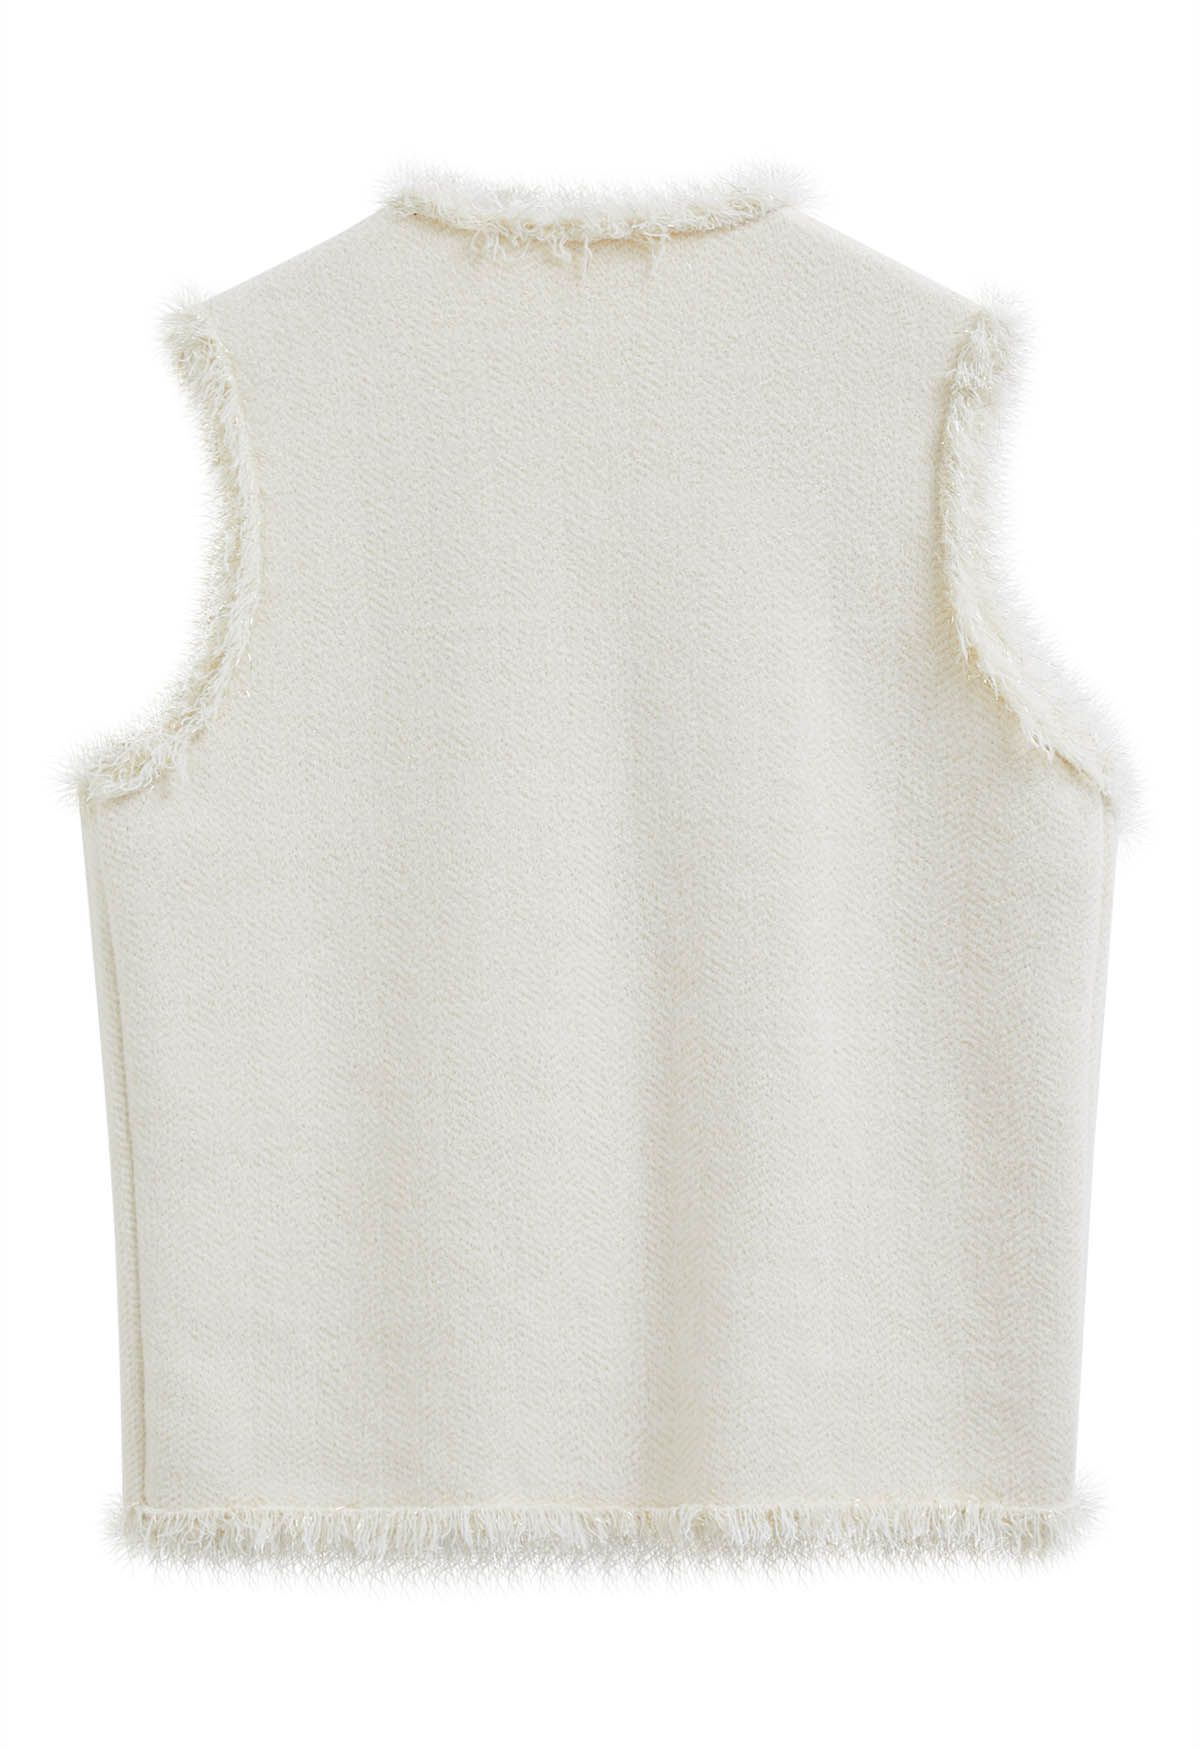 Fringed Edge Buttoned Flap Pocket Knit Vest in Cream